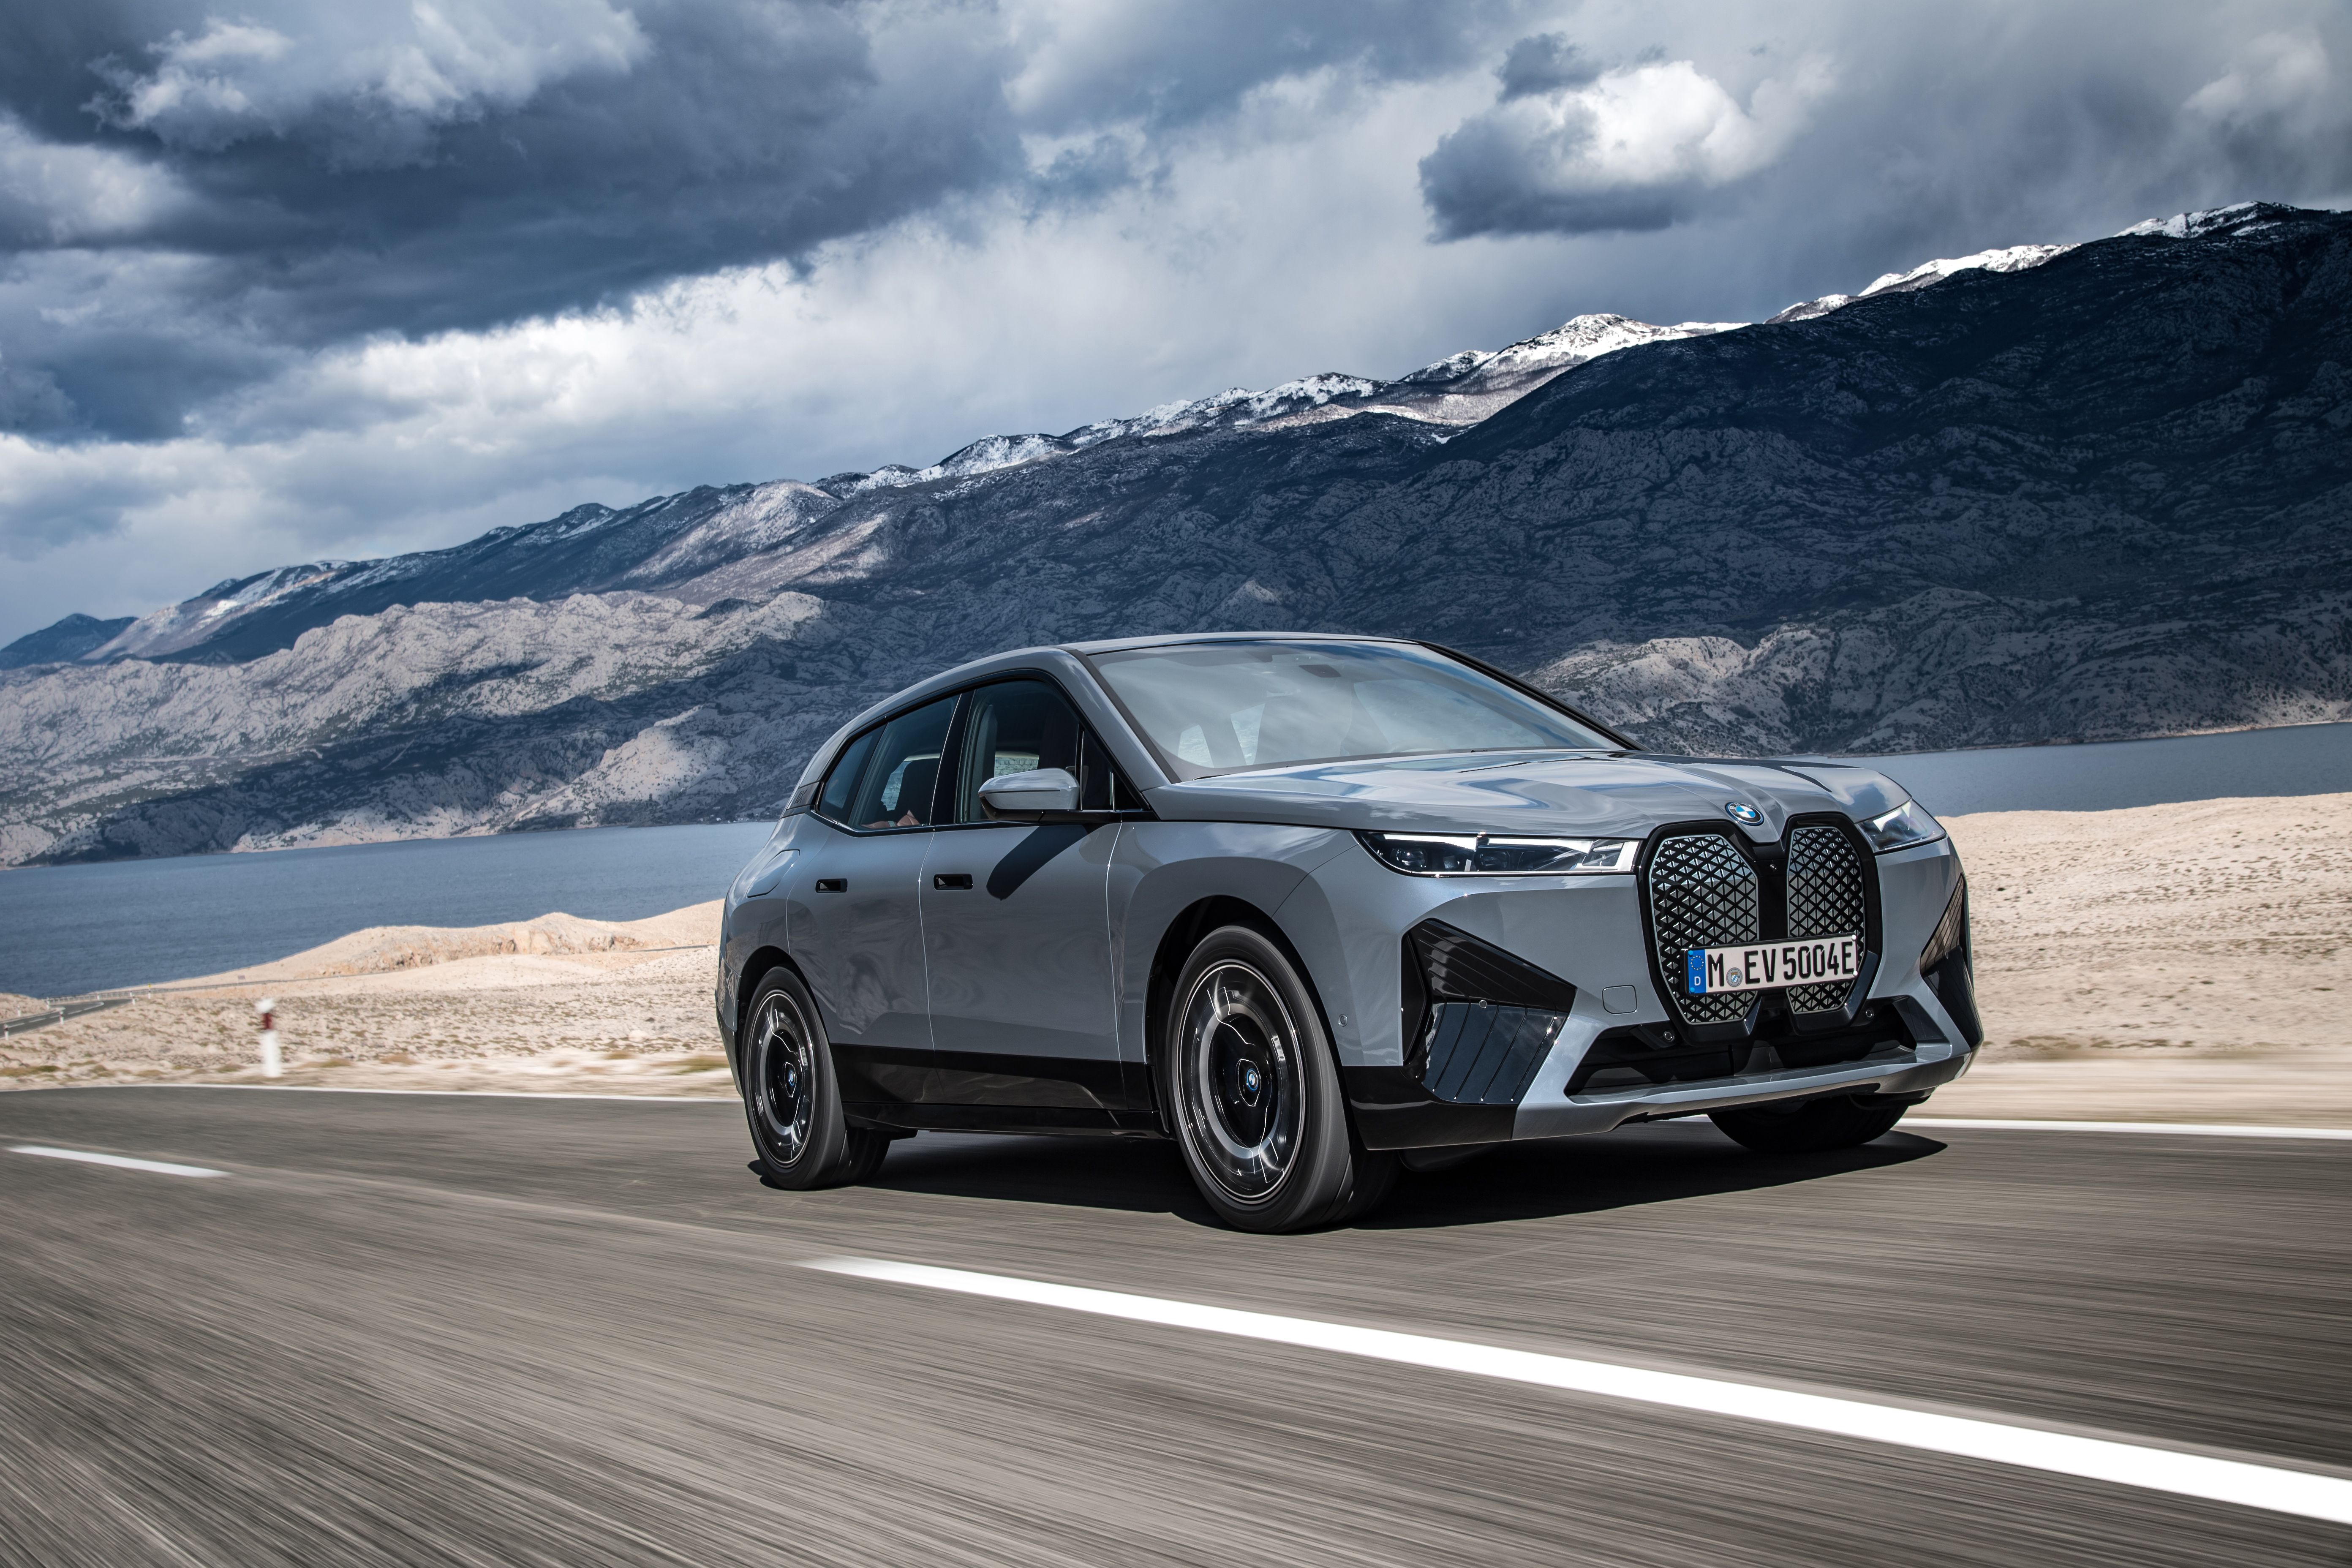 The BMW iX xDrive50 speeds up on the road, front, mountains